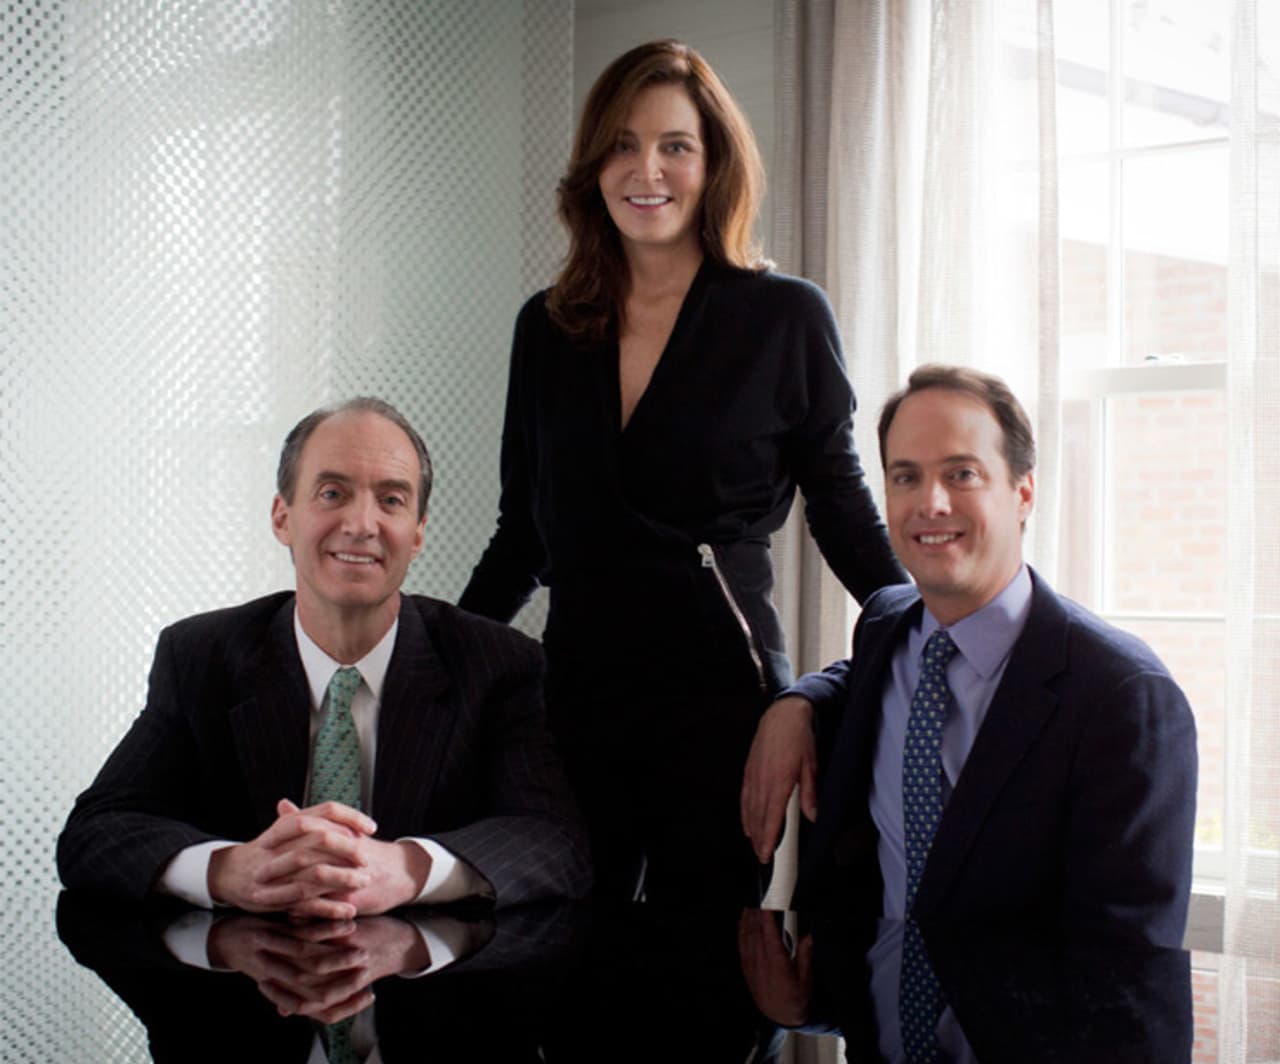 Left to right are Stephen Meyers, Nancy Seaman and Chris Meyers, the brother and sister leadership team for Houlihan Lawrence.  Brotherhood & Higley, New Canaan's oldest real estate brokerage, announced on Tuesday it would affiliate with HL.